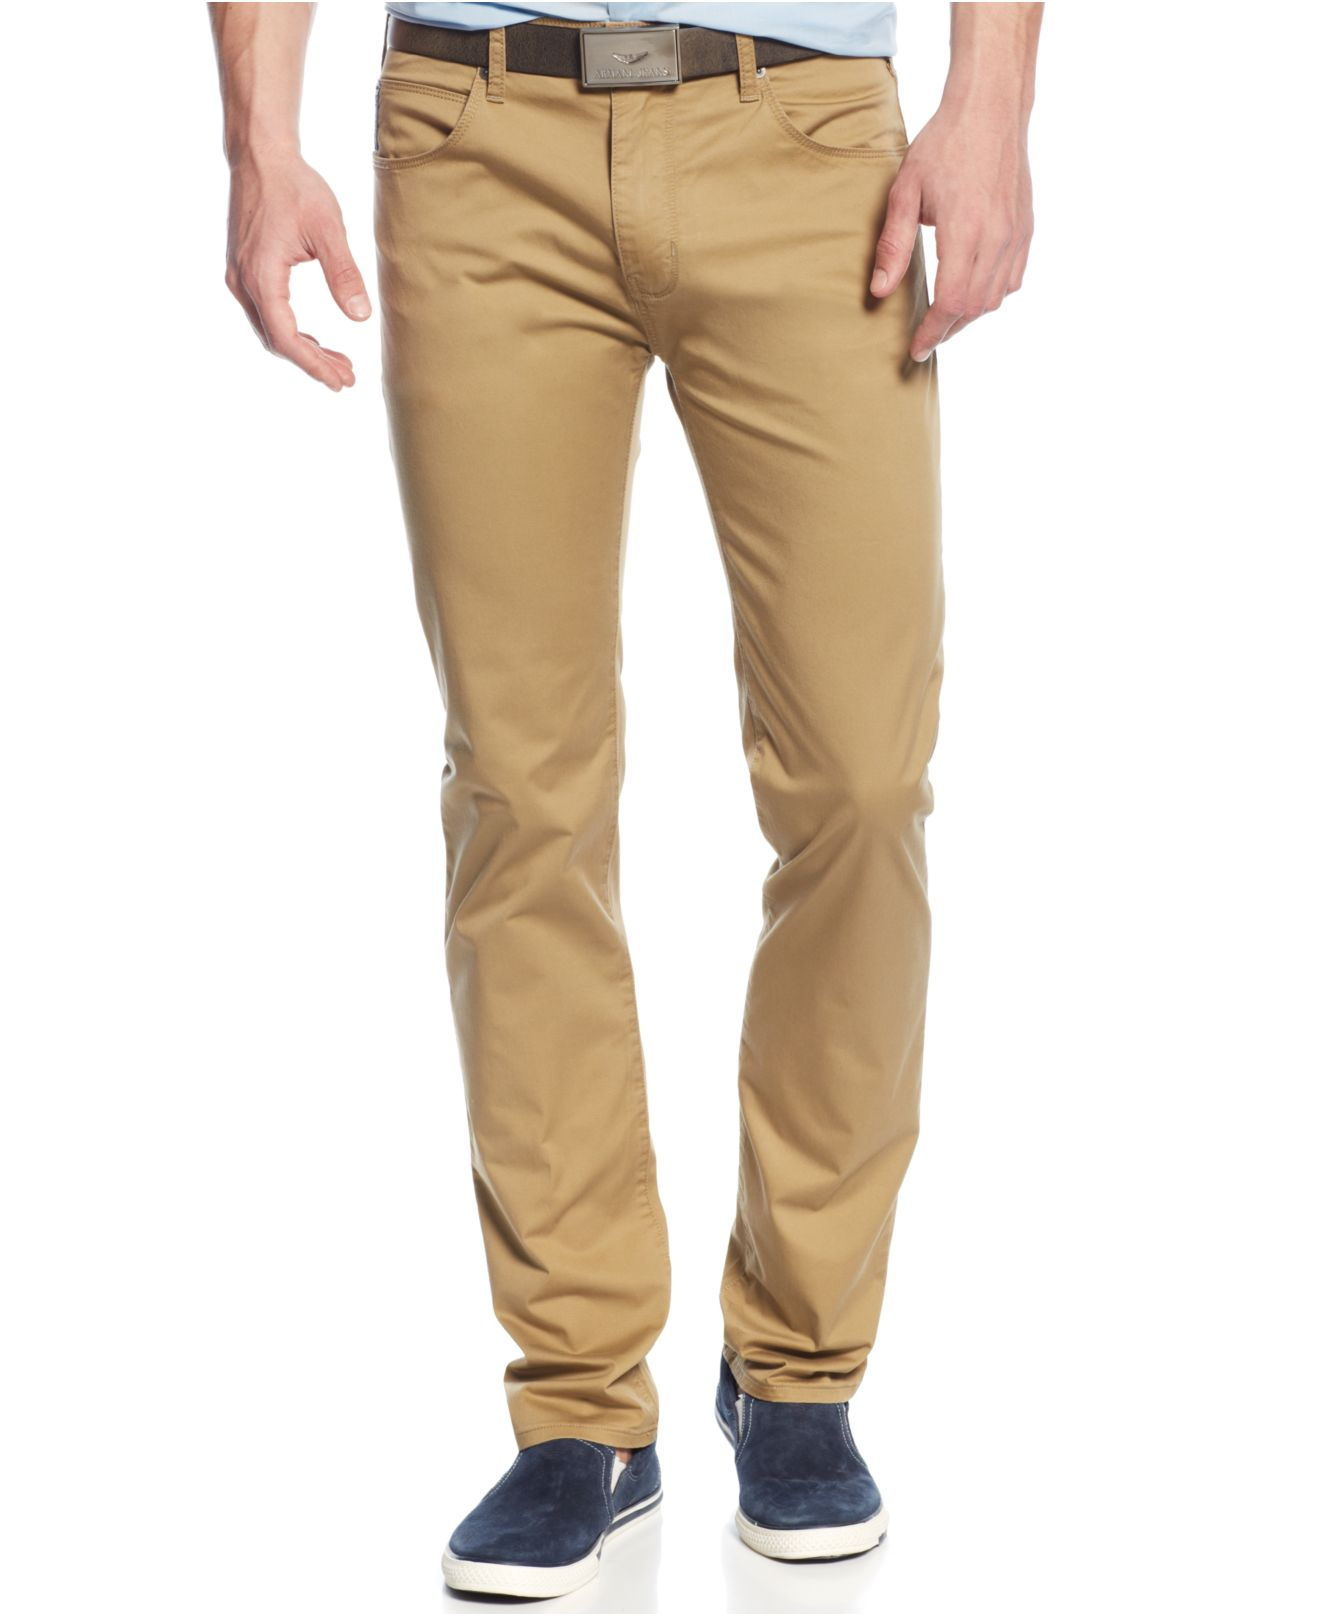 Lyst - Armani Jeans 5-pocket Regular Fit Twill Pants in Natural for Men